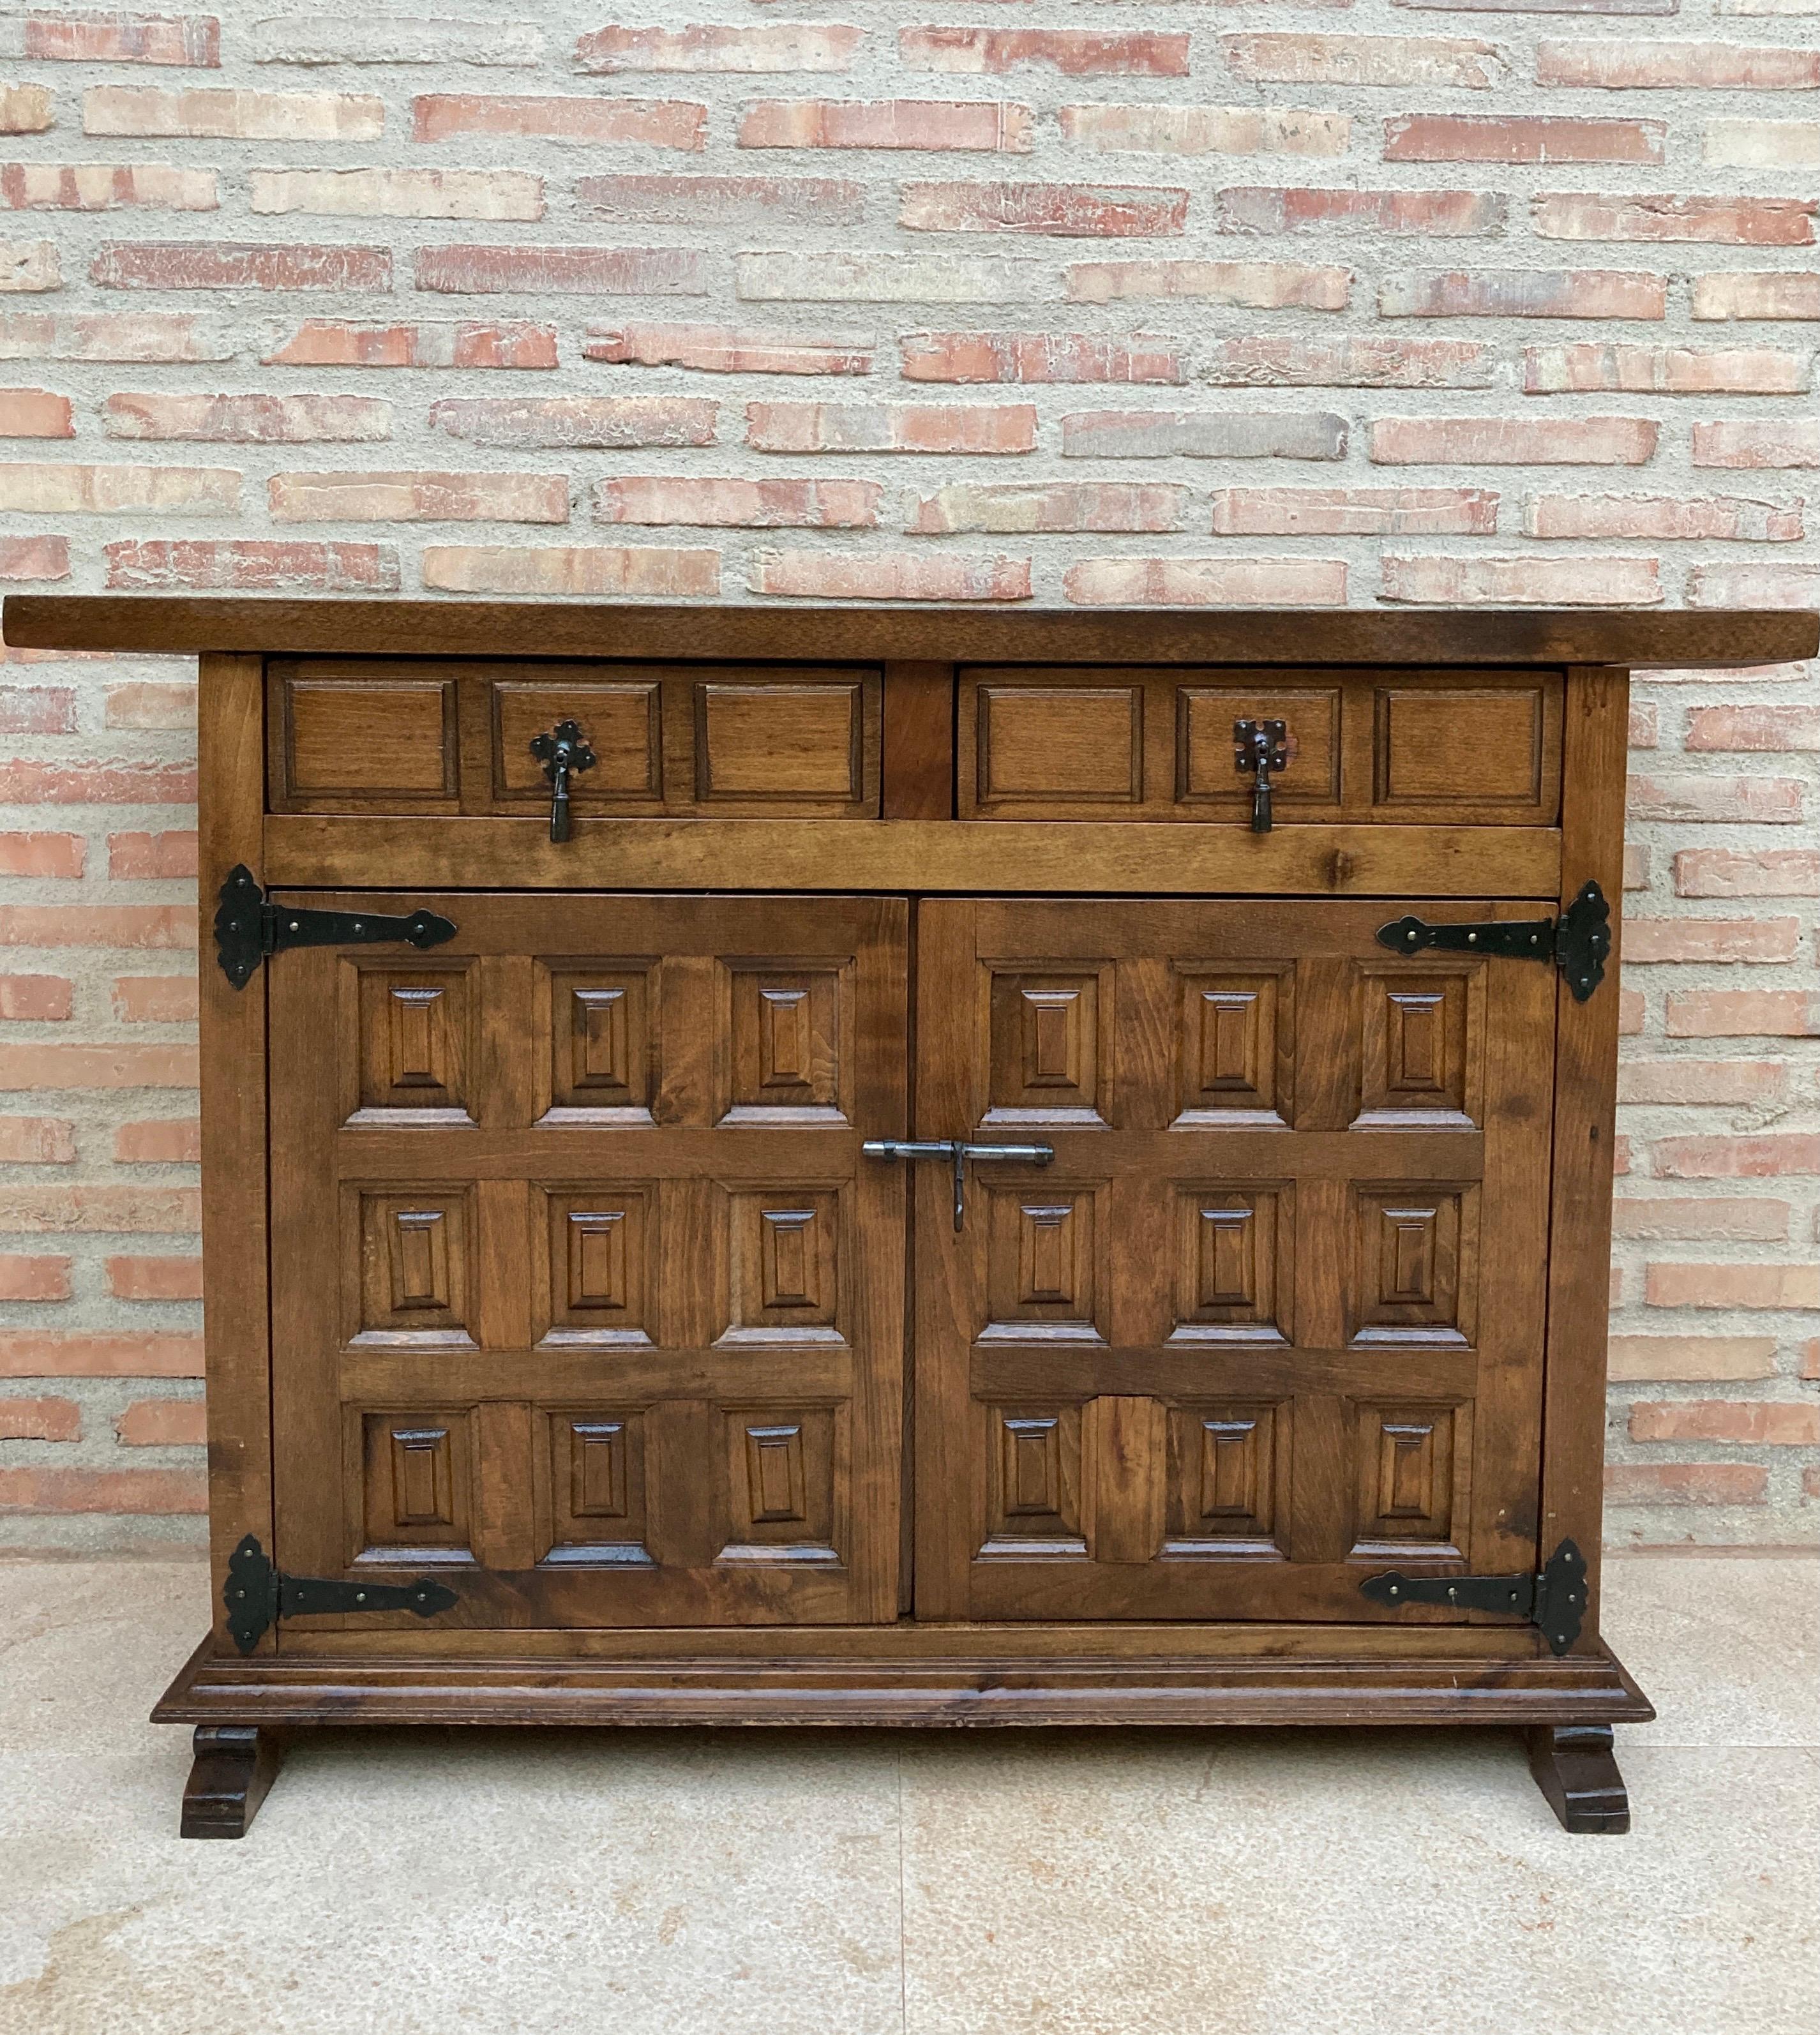 From Northern Spain, constructed of solid walnut, the rectangular top with molded edge atop a conforming case housing two drawers over two doors, the doors paneled with solid walnut, raised on a plinth base.

Condition report:

This vintage item